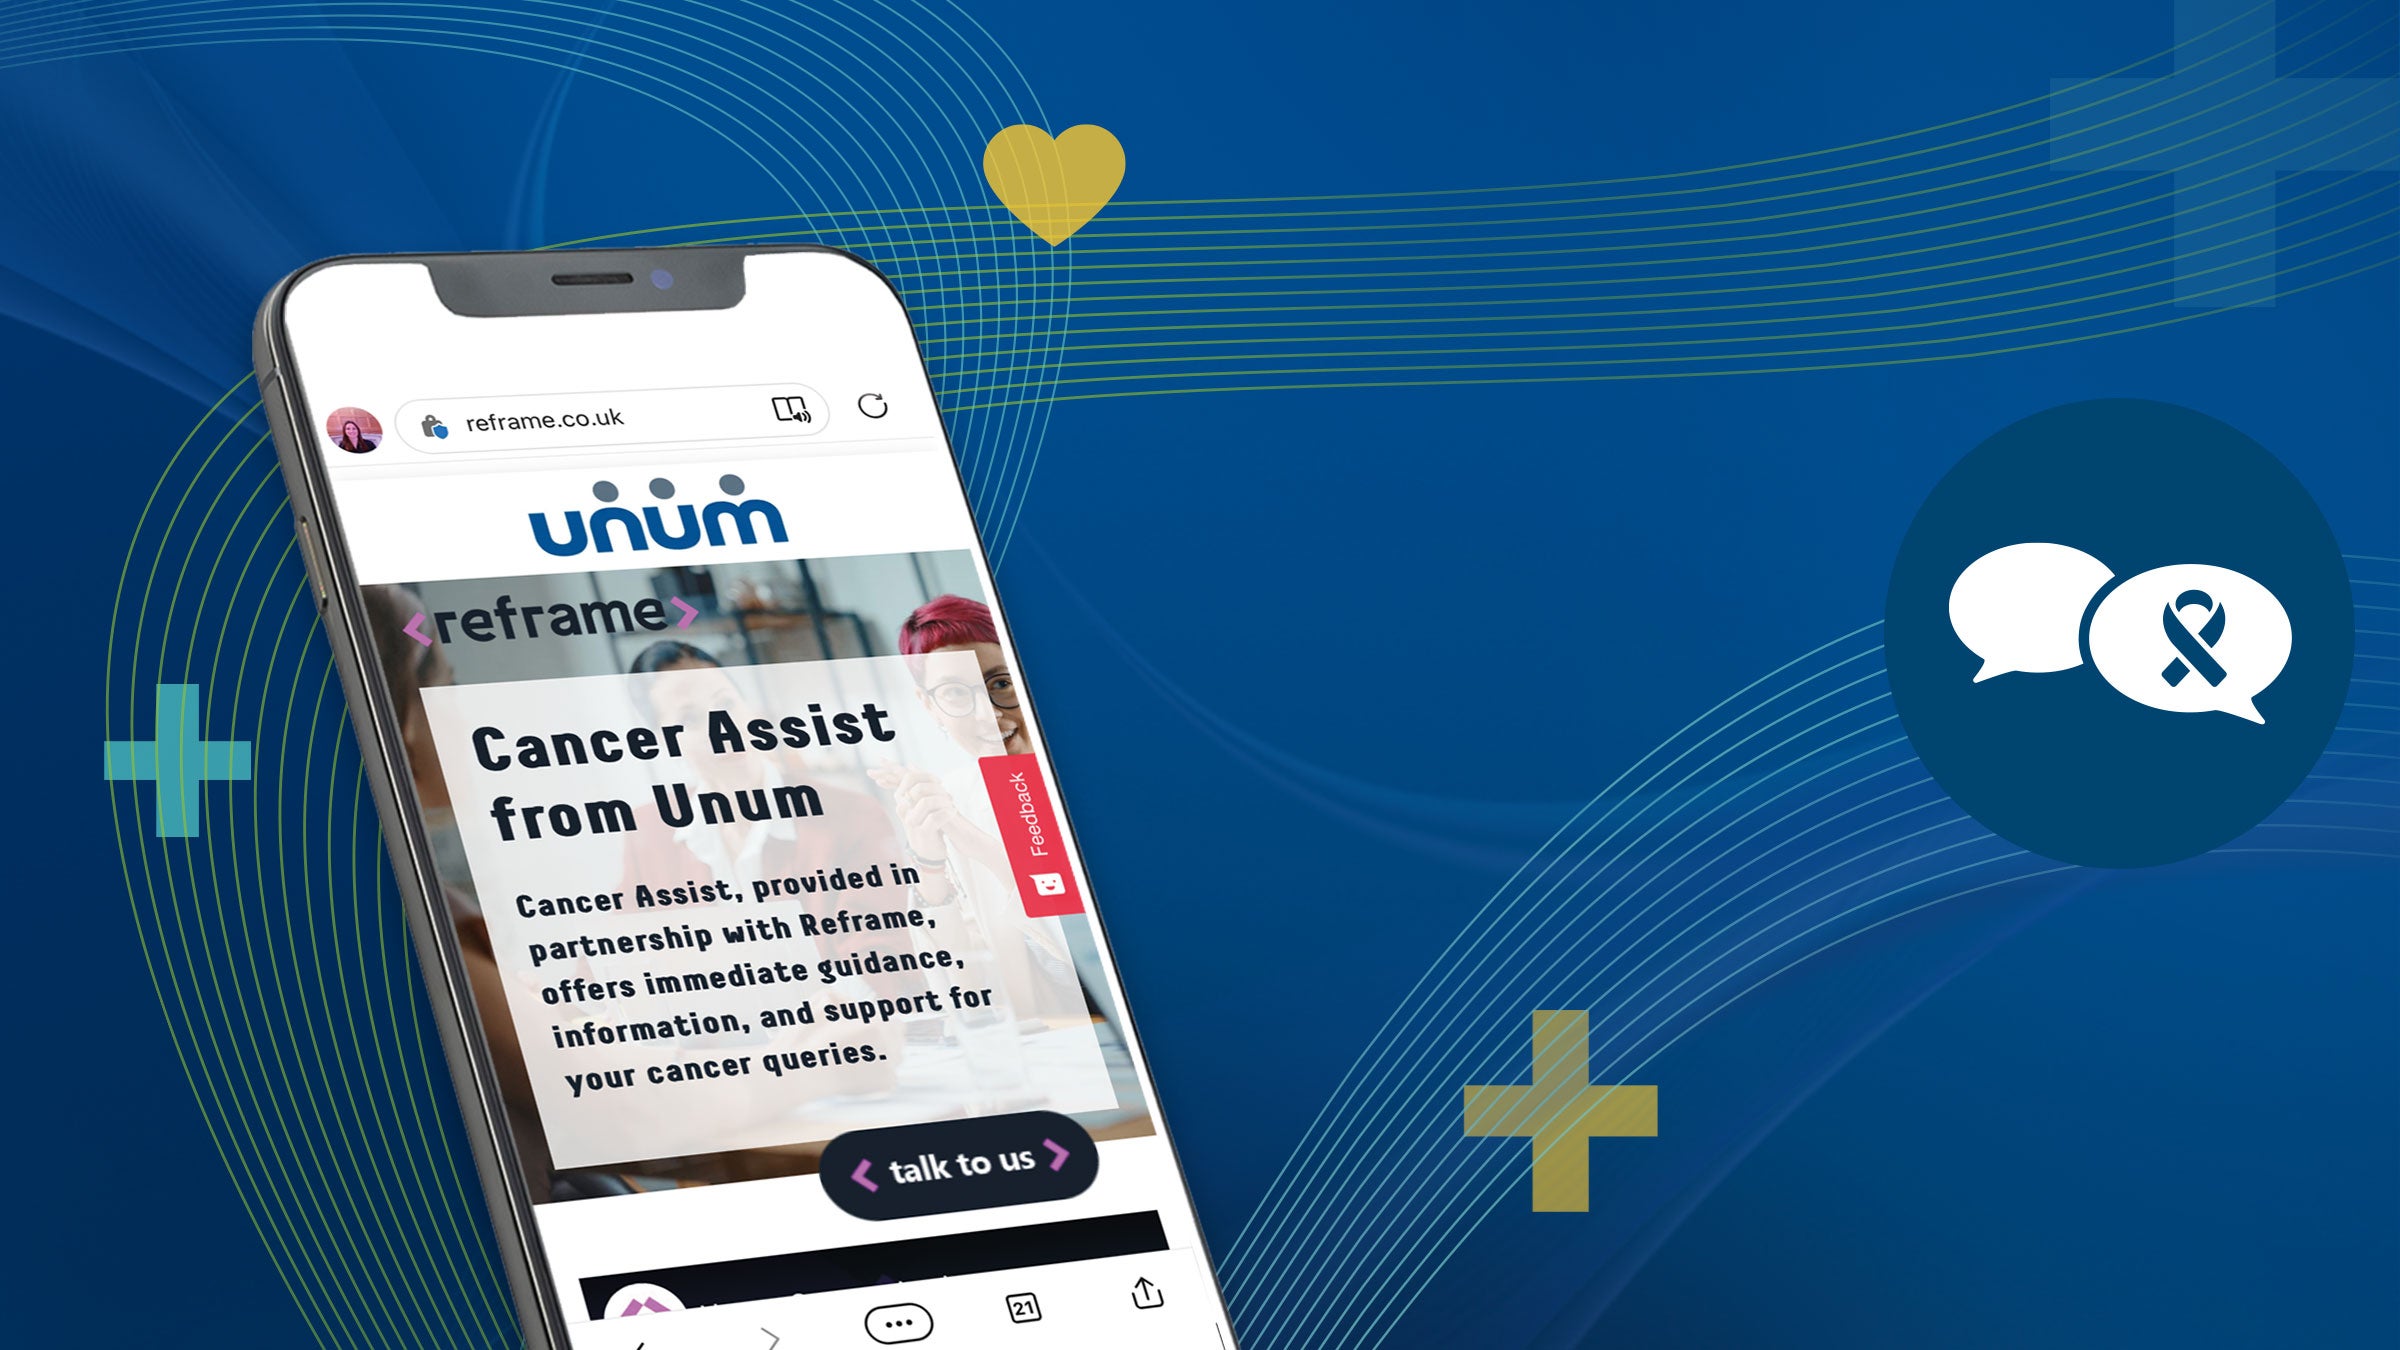 Cancer Assist from Unum integrated in the Help@hand app.